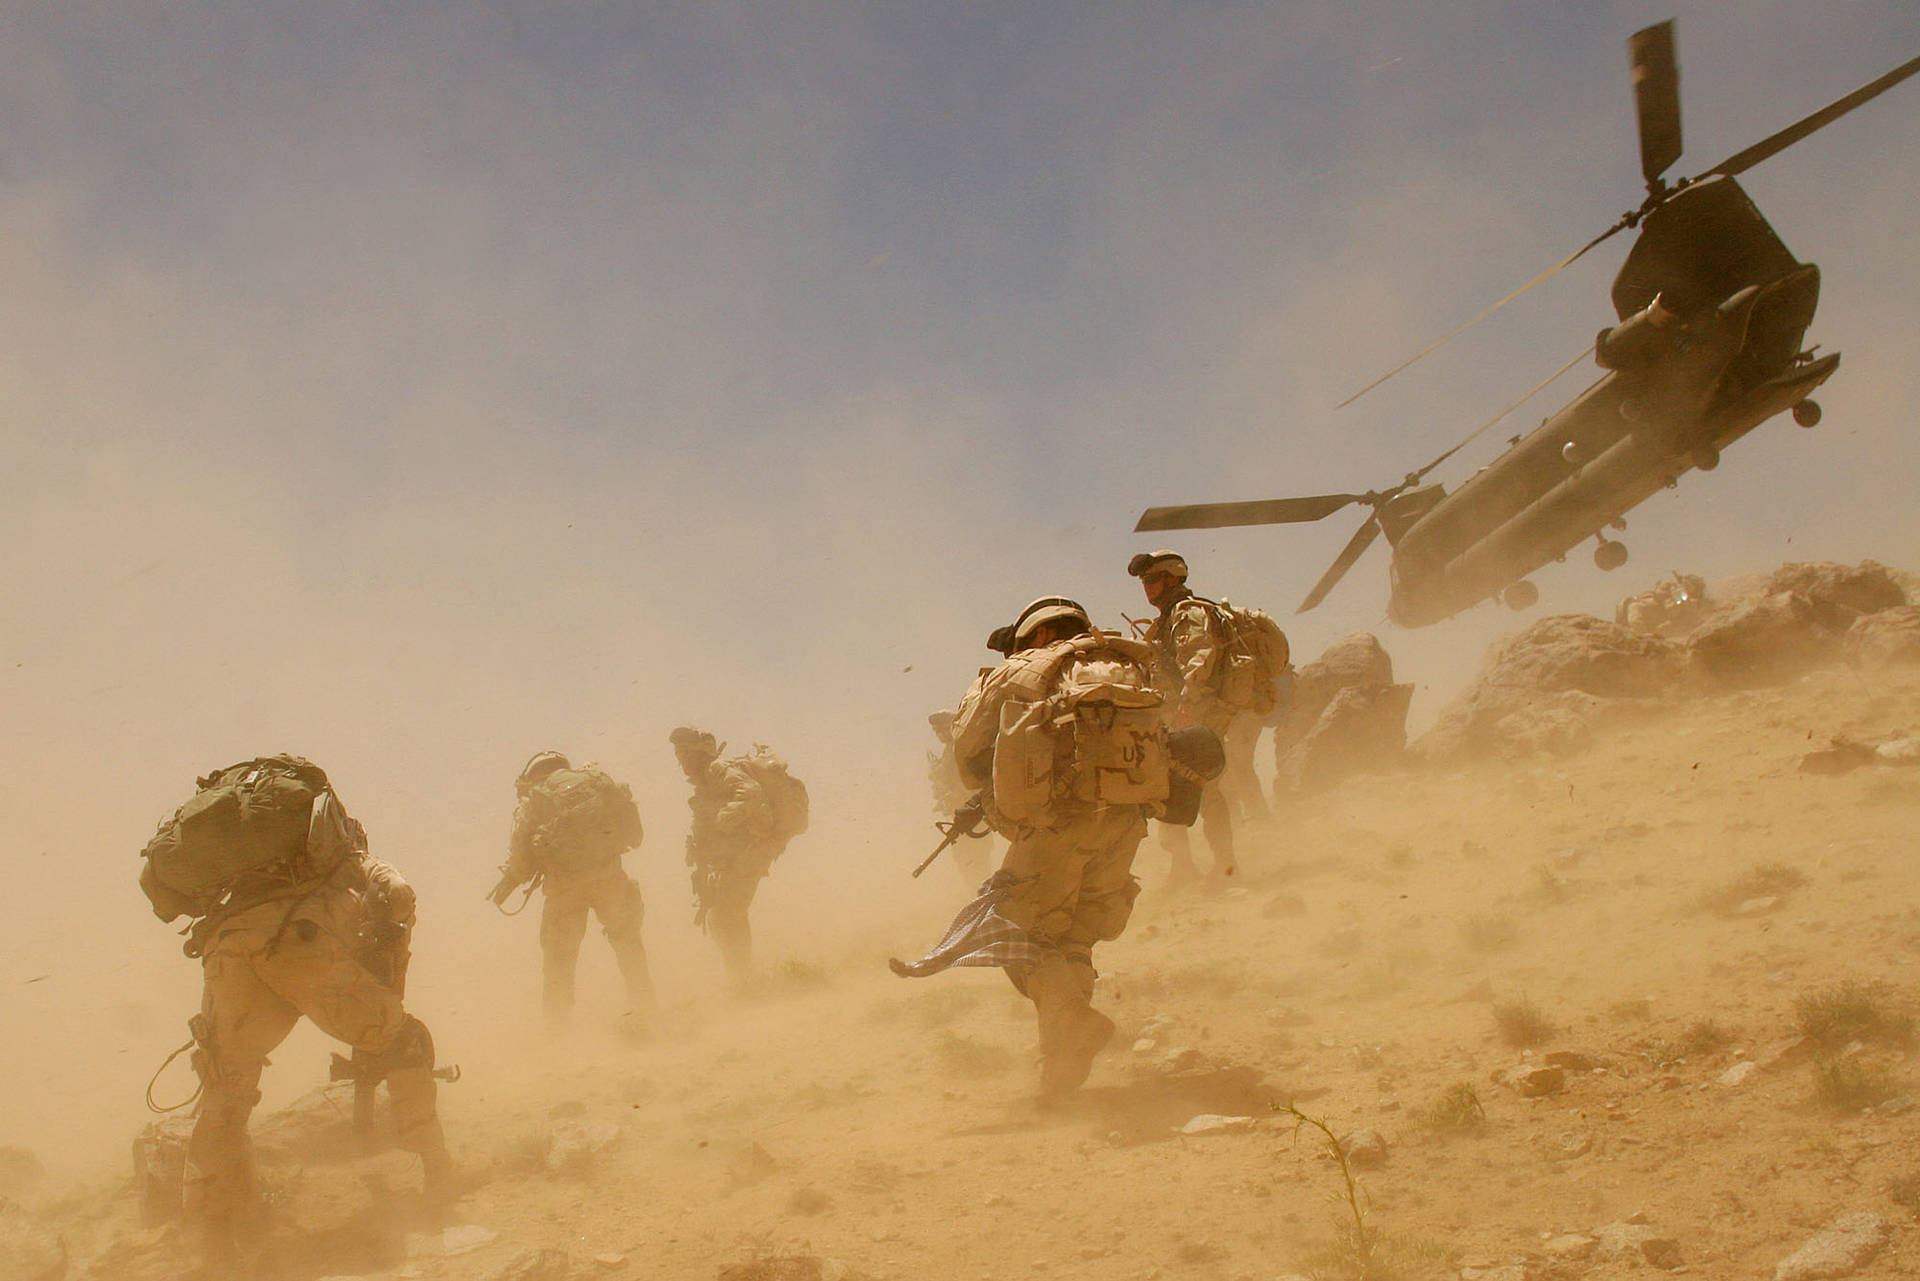 Caption: Afghanistan Military Forces In A Desert Storm